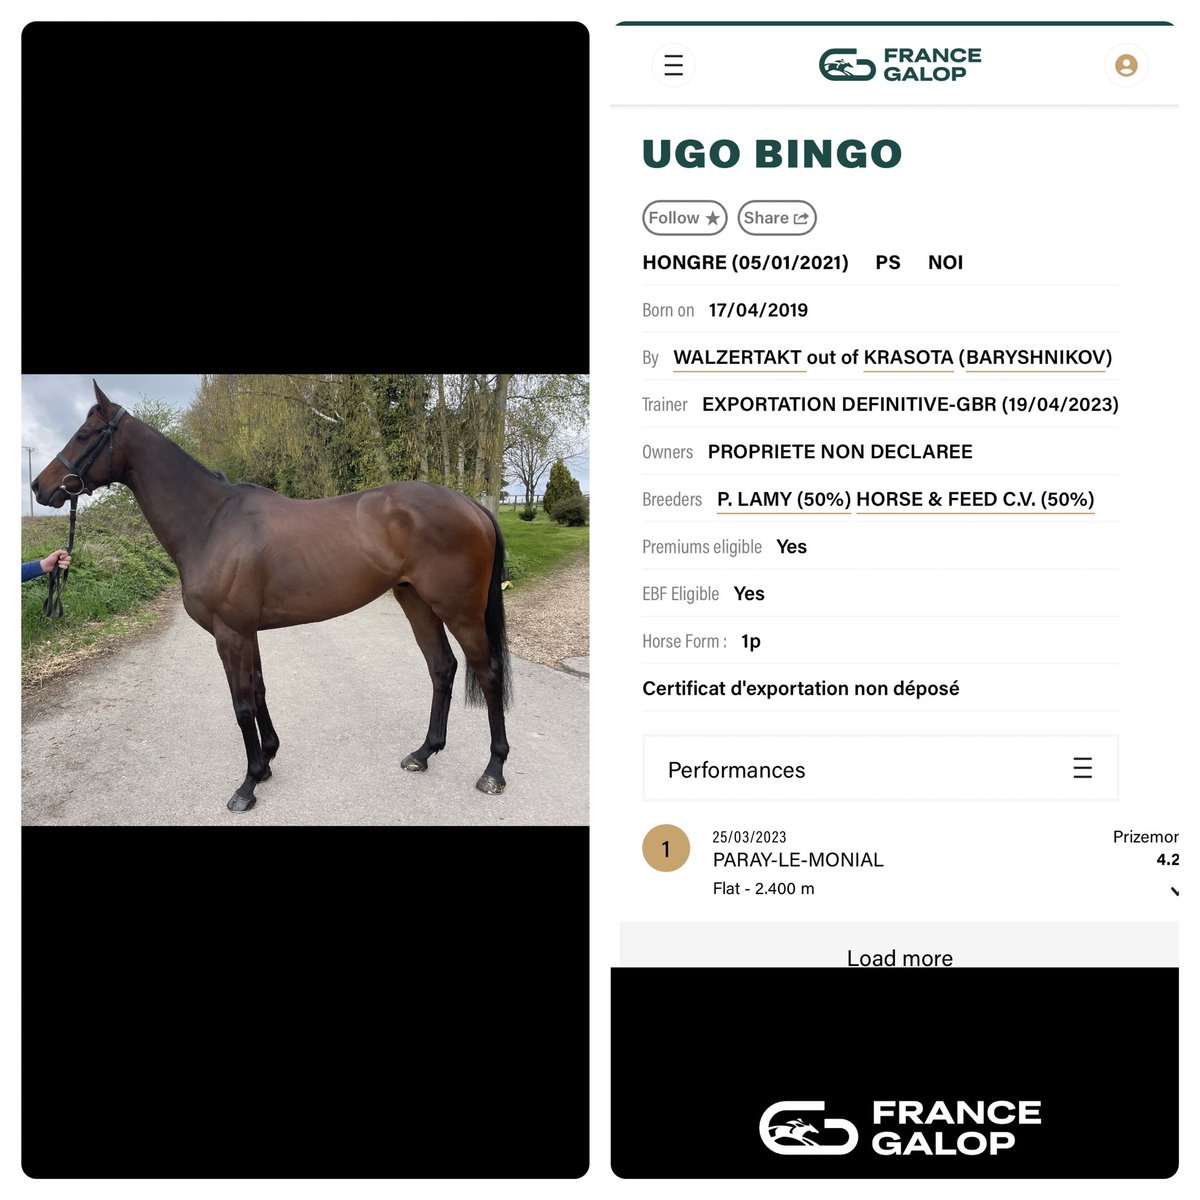 ⭐️⭐️⭐️ FOR SALE⭐️⭐️⭐️ 
UGO BINGO won his bumper in France & the 2nd Horse has since won.
Open to full or shared ownership please message for more info.